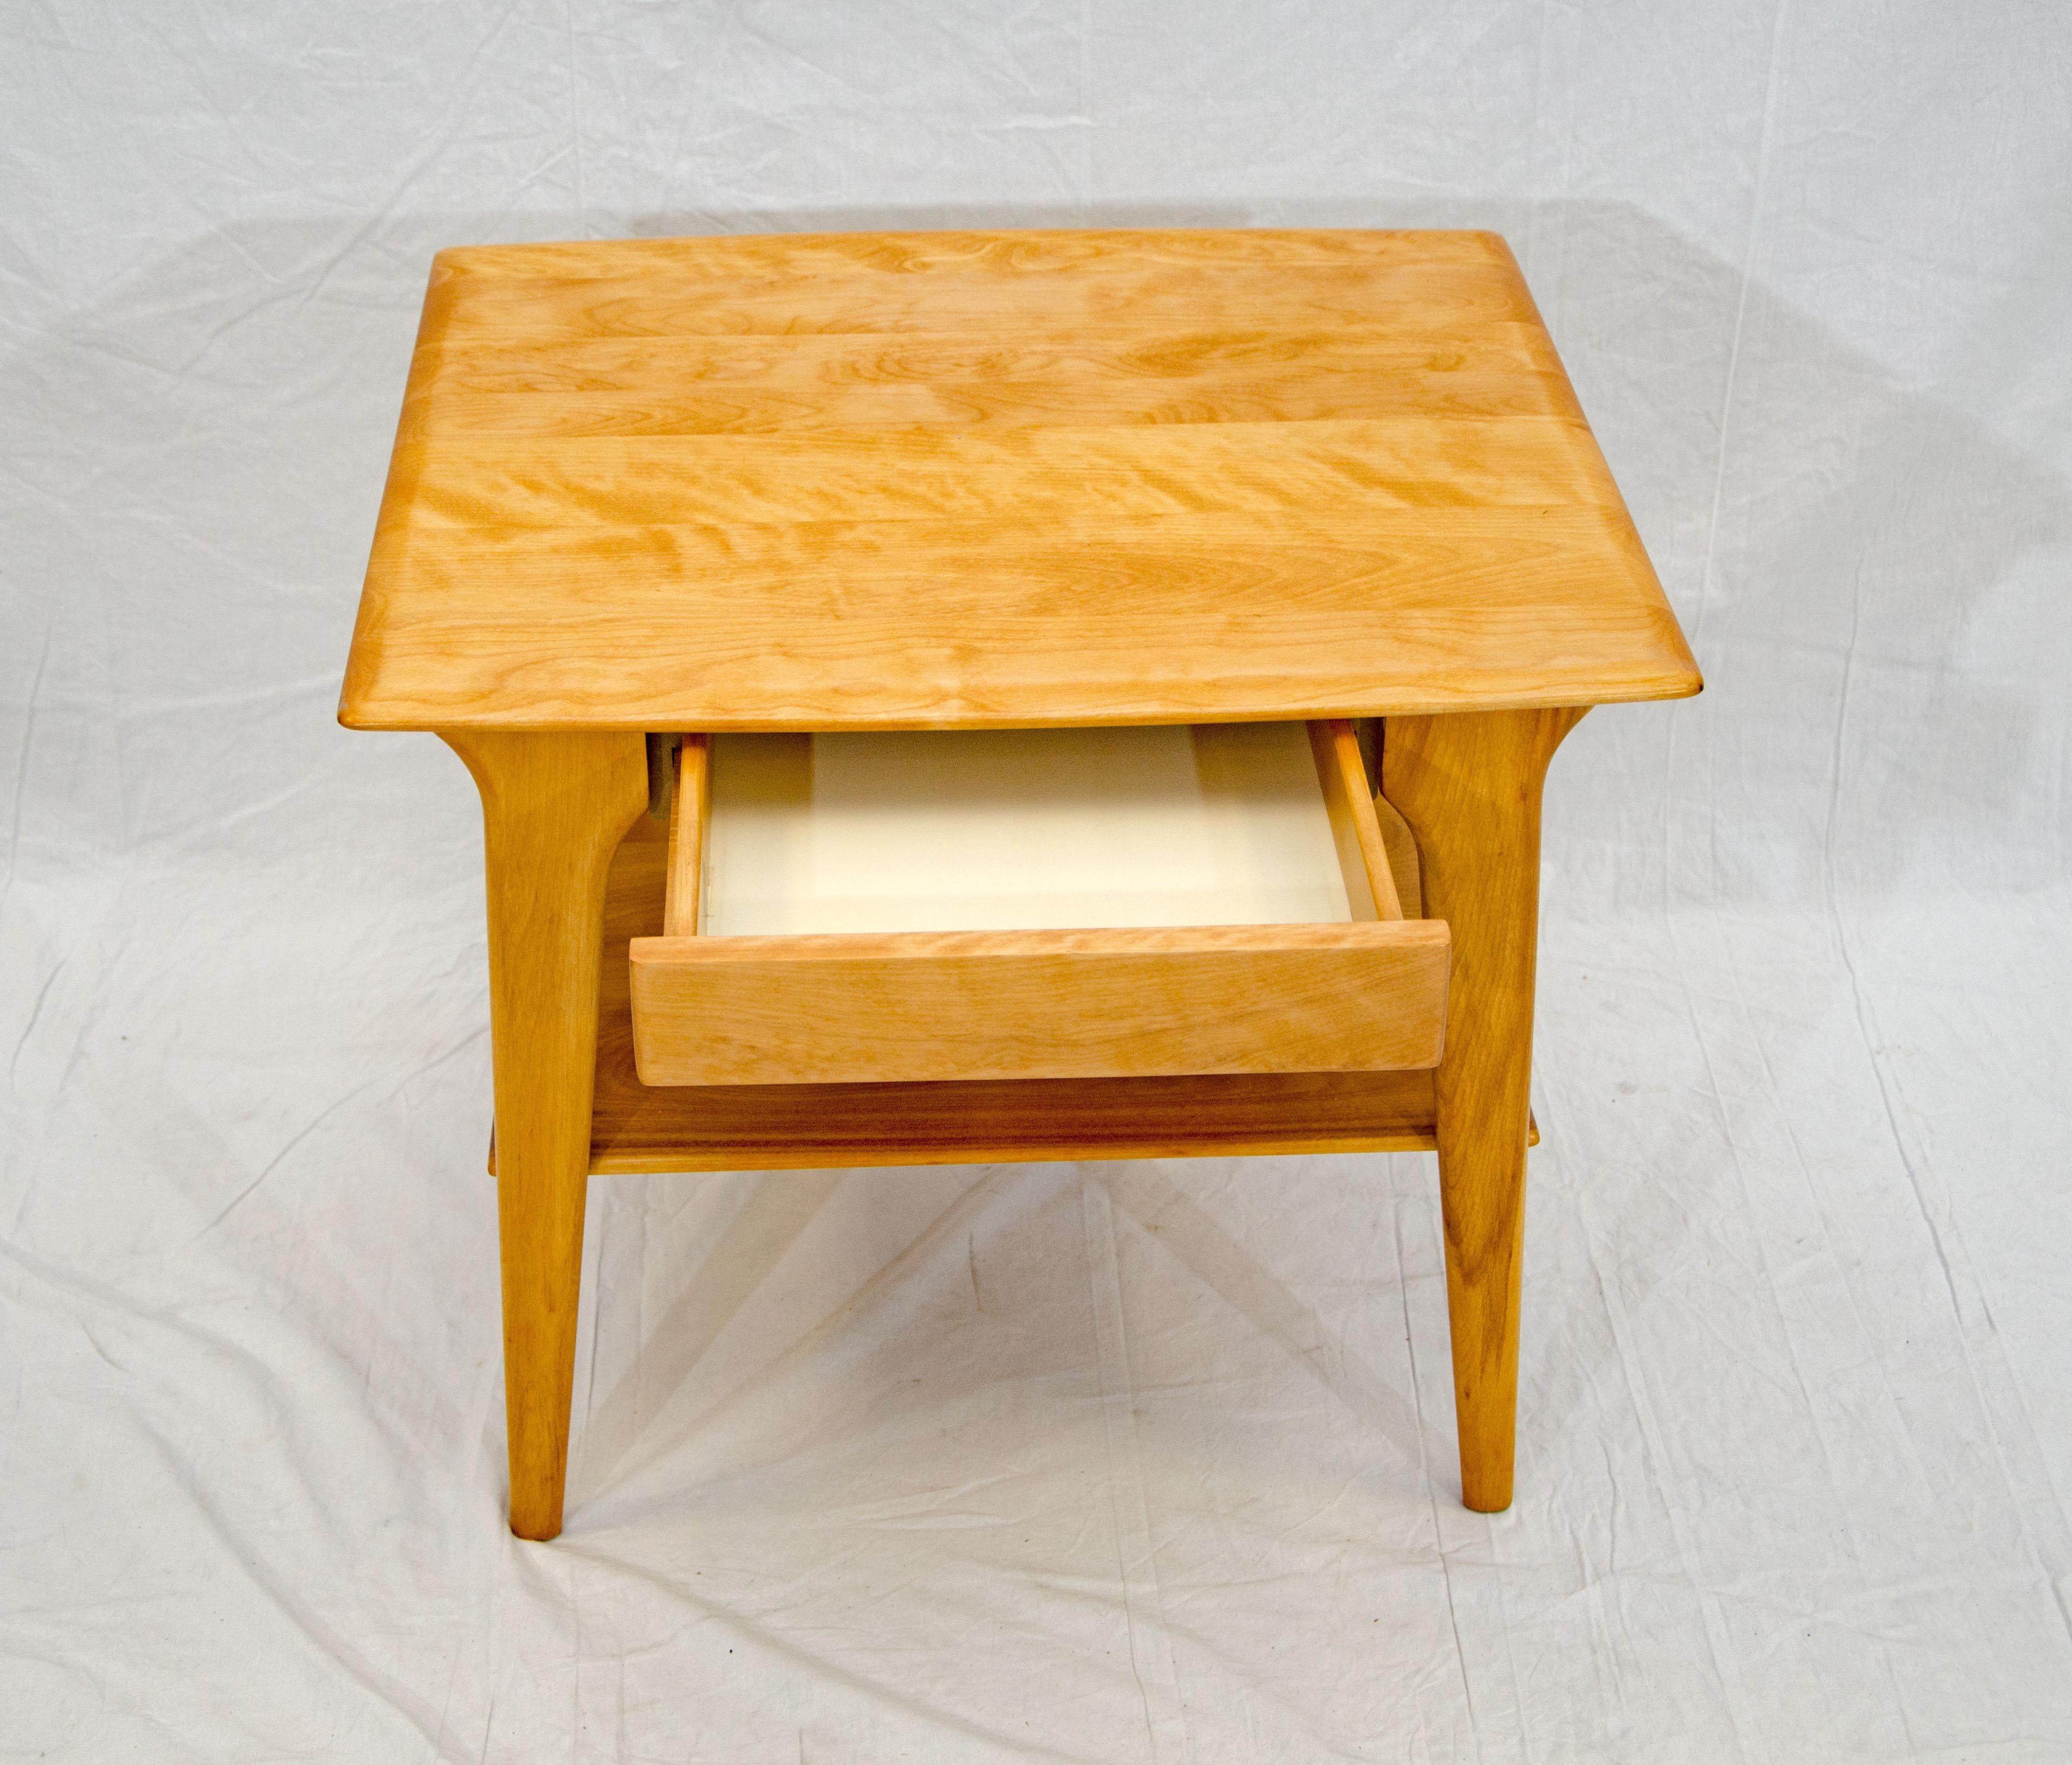 Vintage Heywood Wakefield Occasional / End Table with Drawer, M 1538 G 5